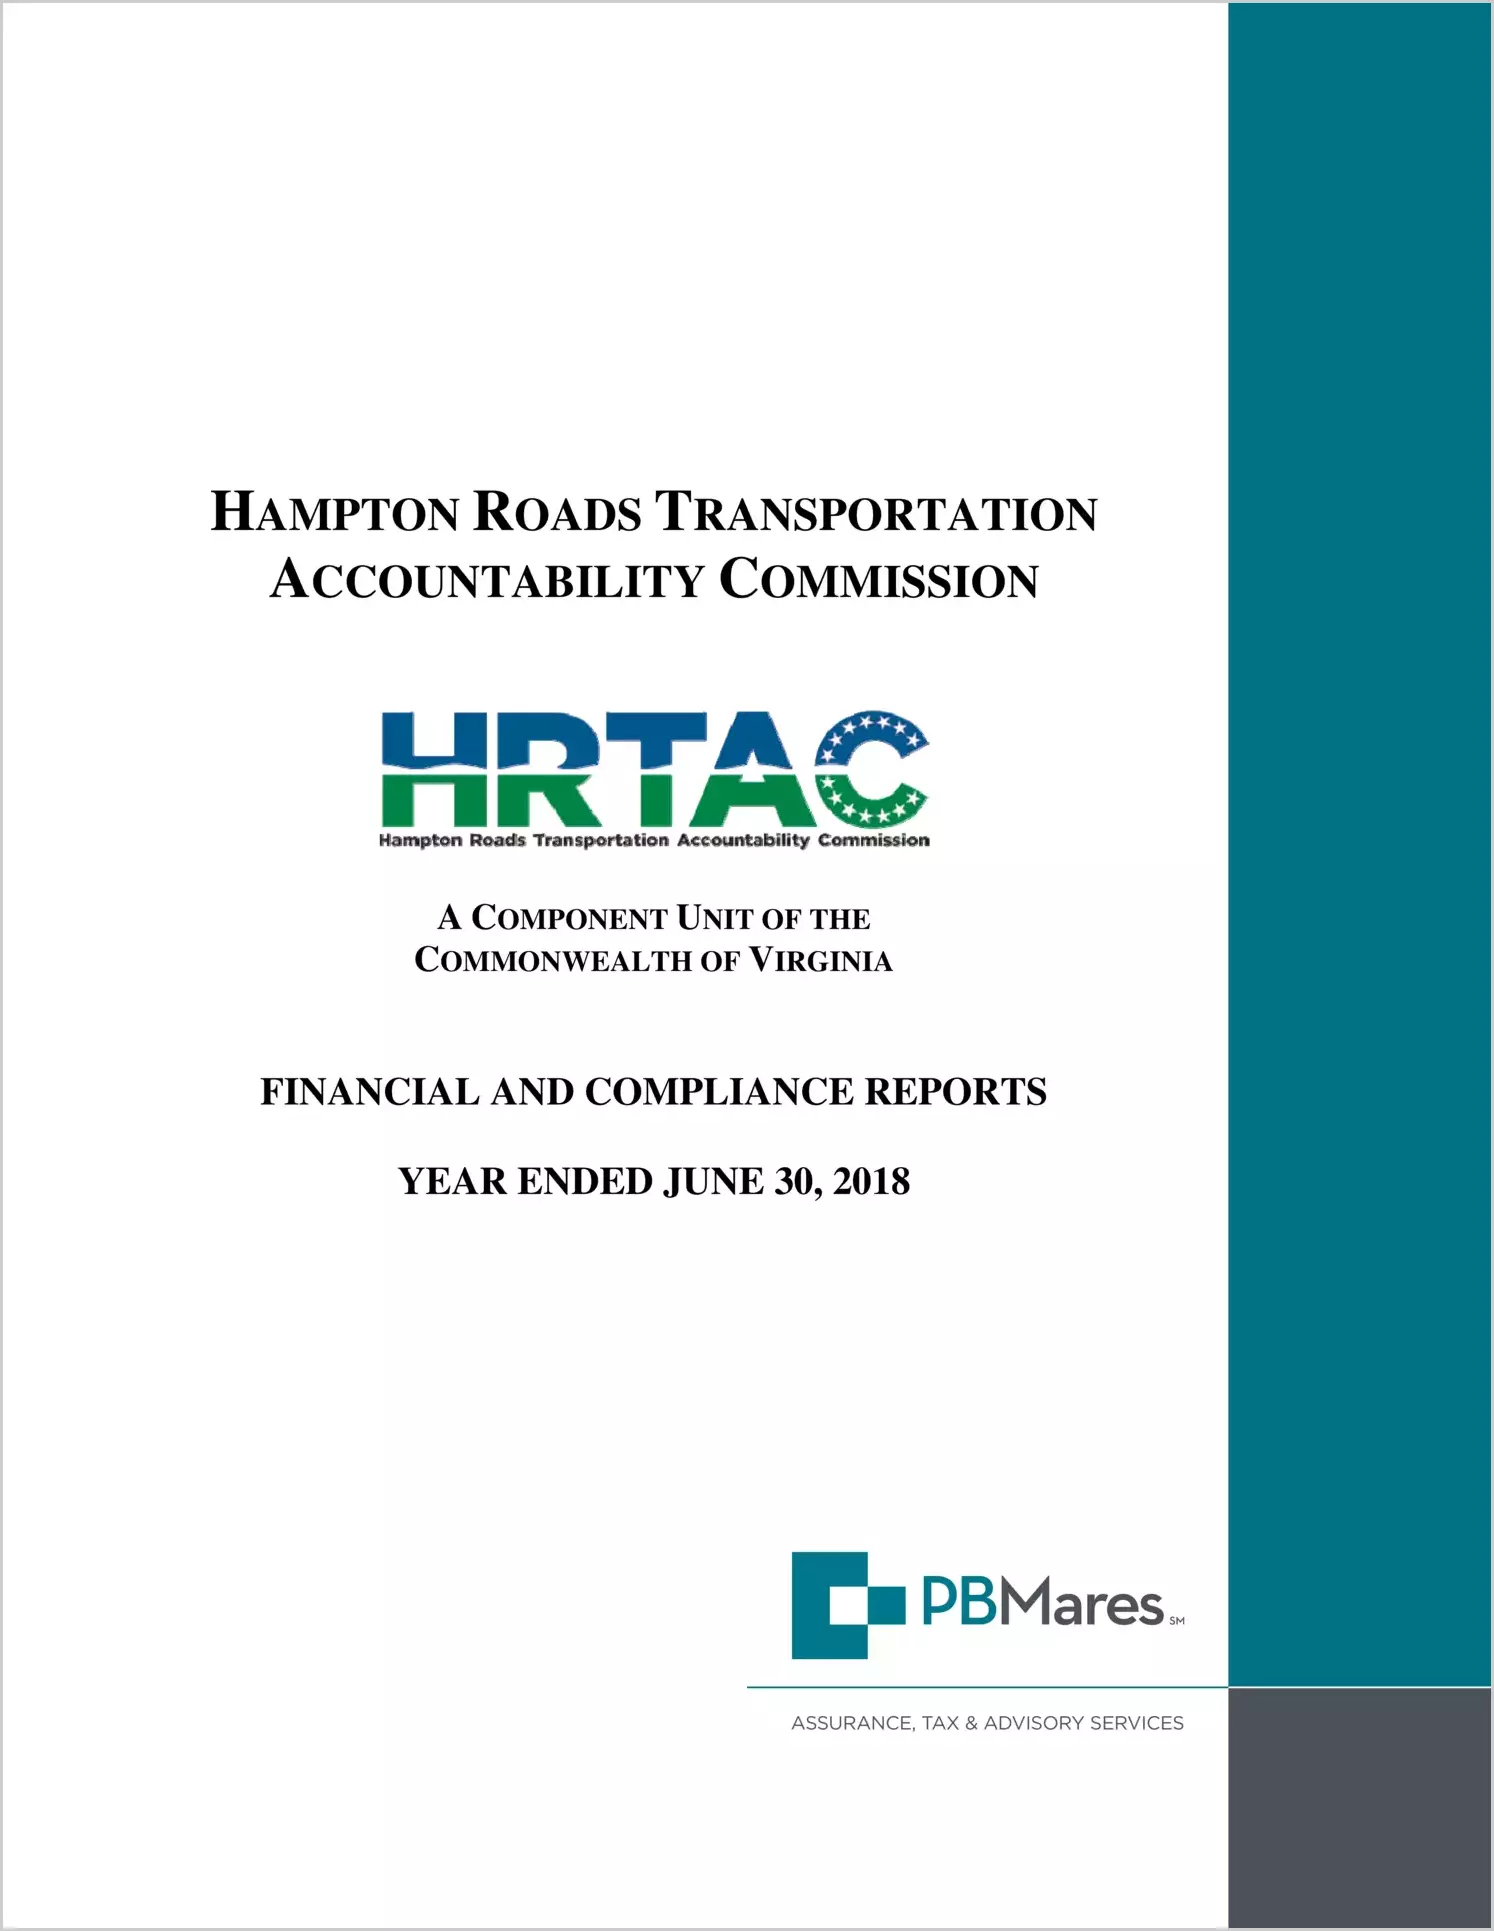 Hampton Roads Transportation Accountability Commission for the fiscal year ended June 30, 2018